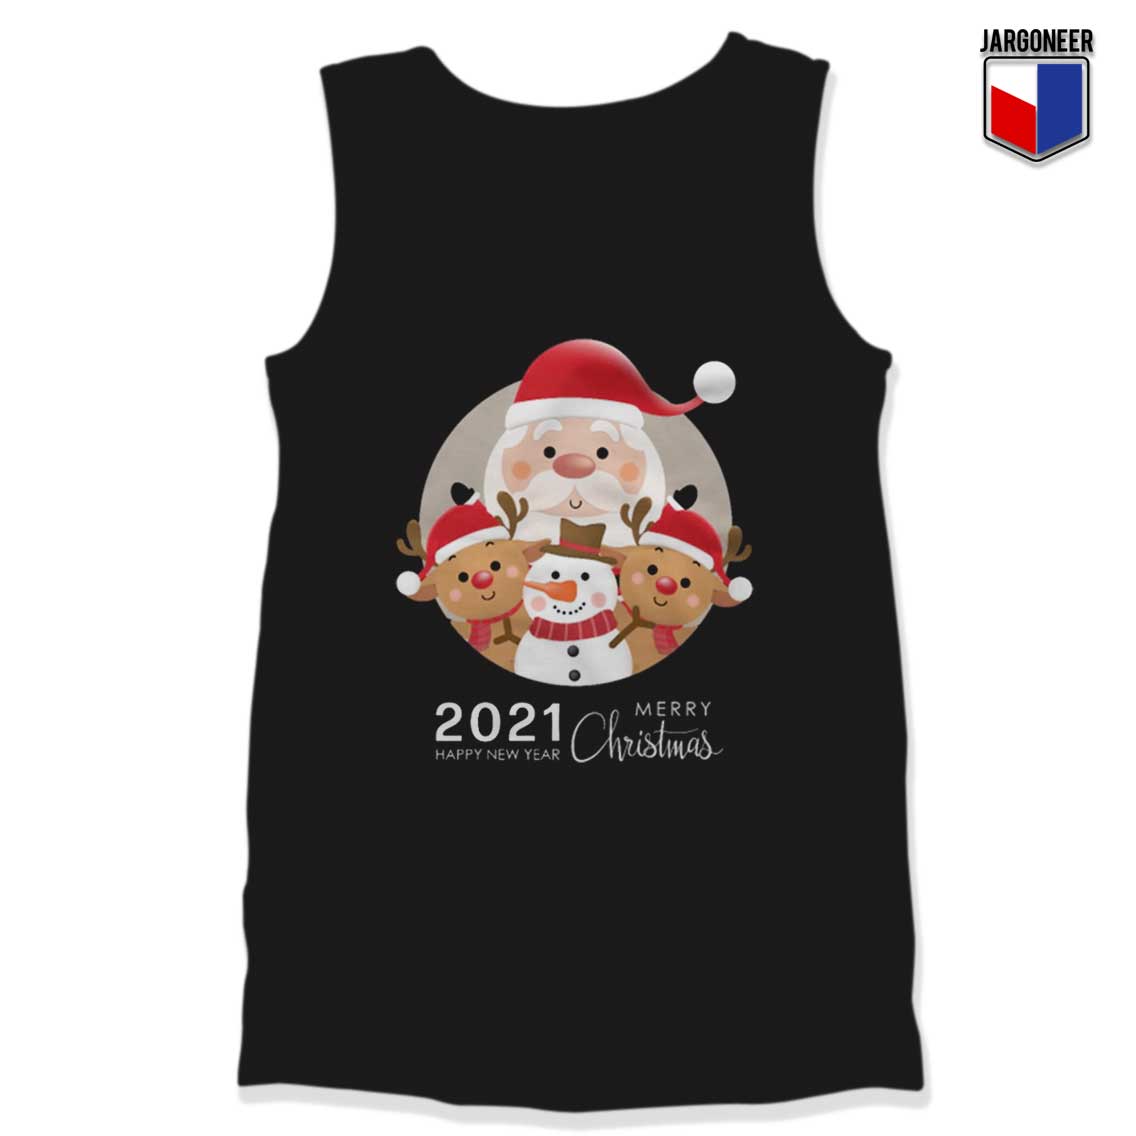 Happy New Year Cute Tank Top - Shop Unique Graphic Cool Shirt Designs